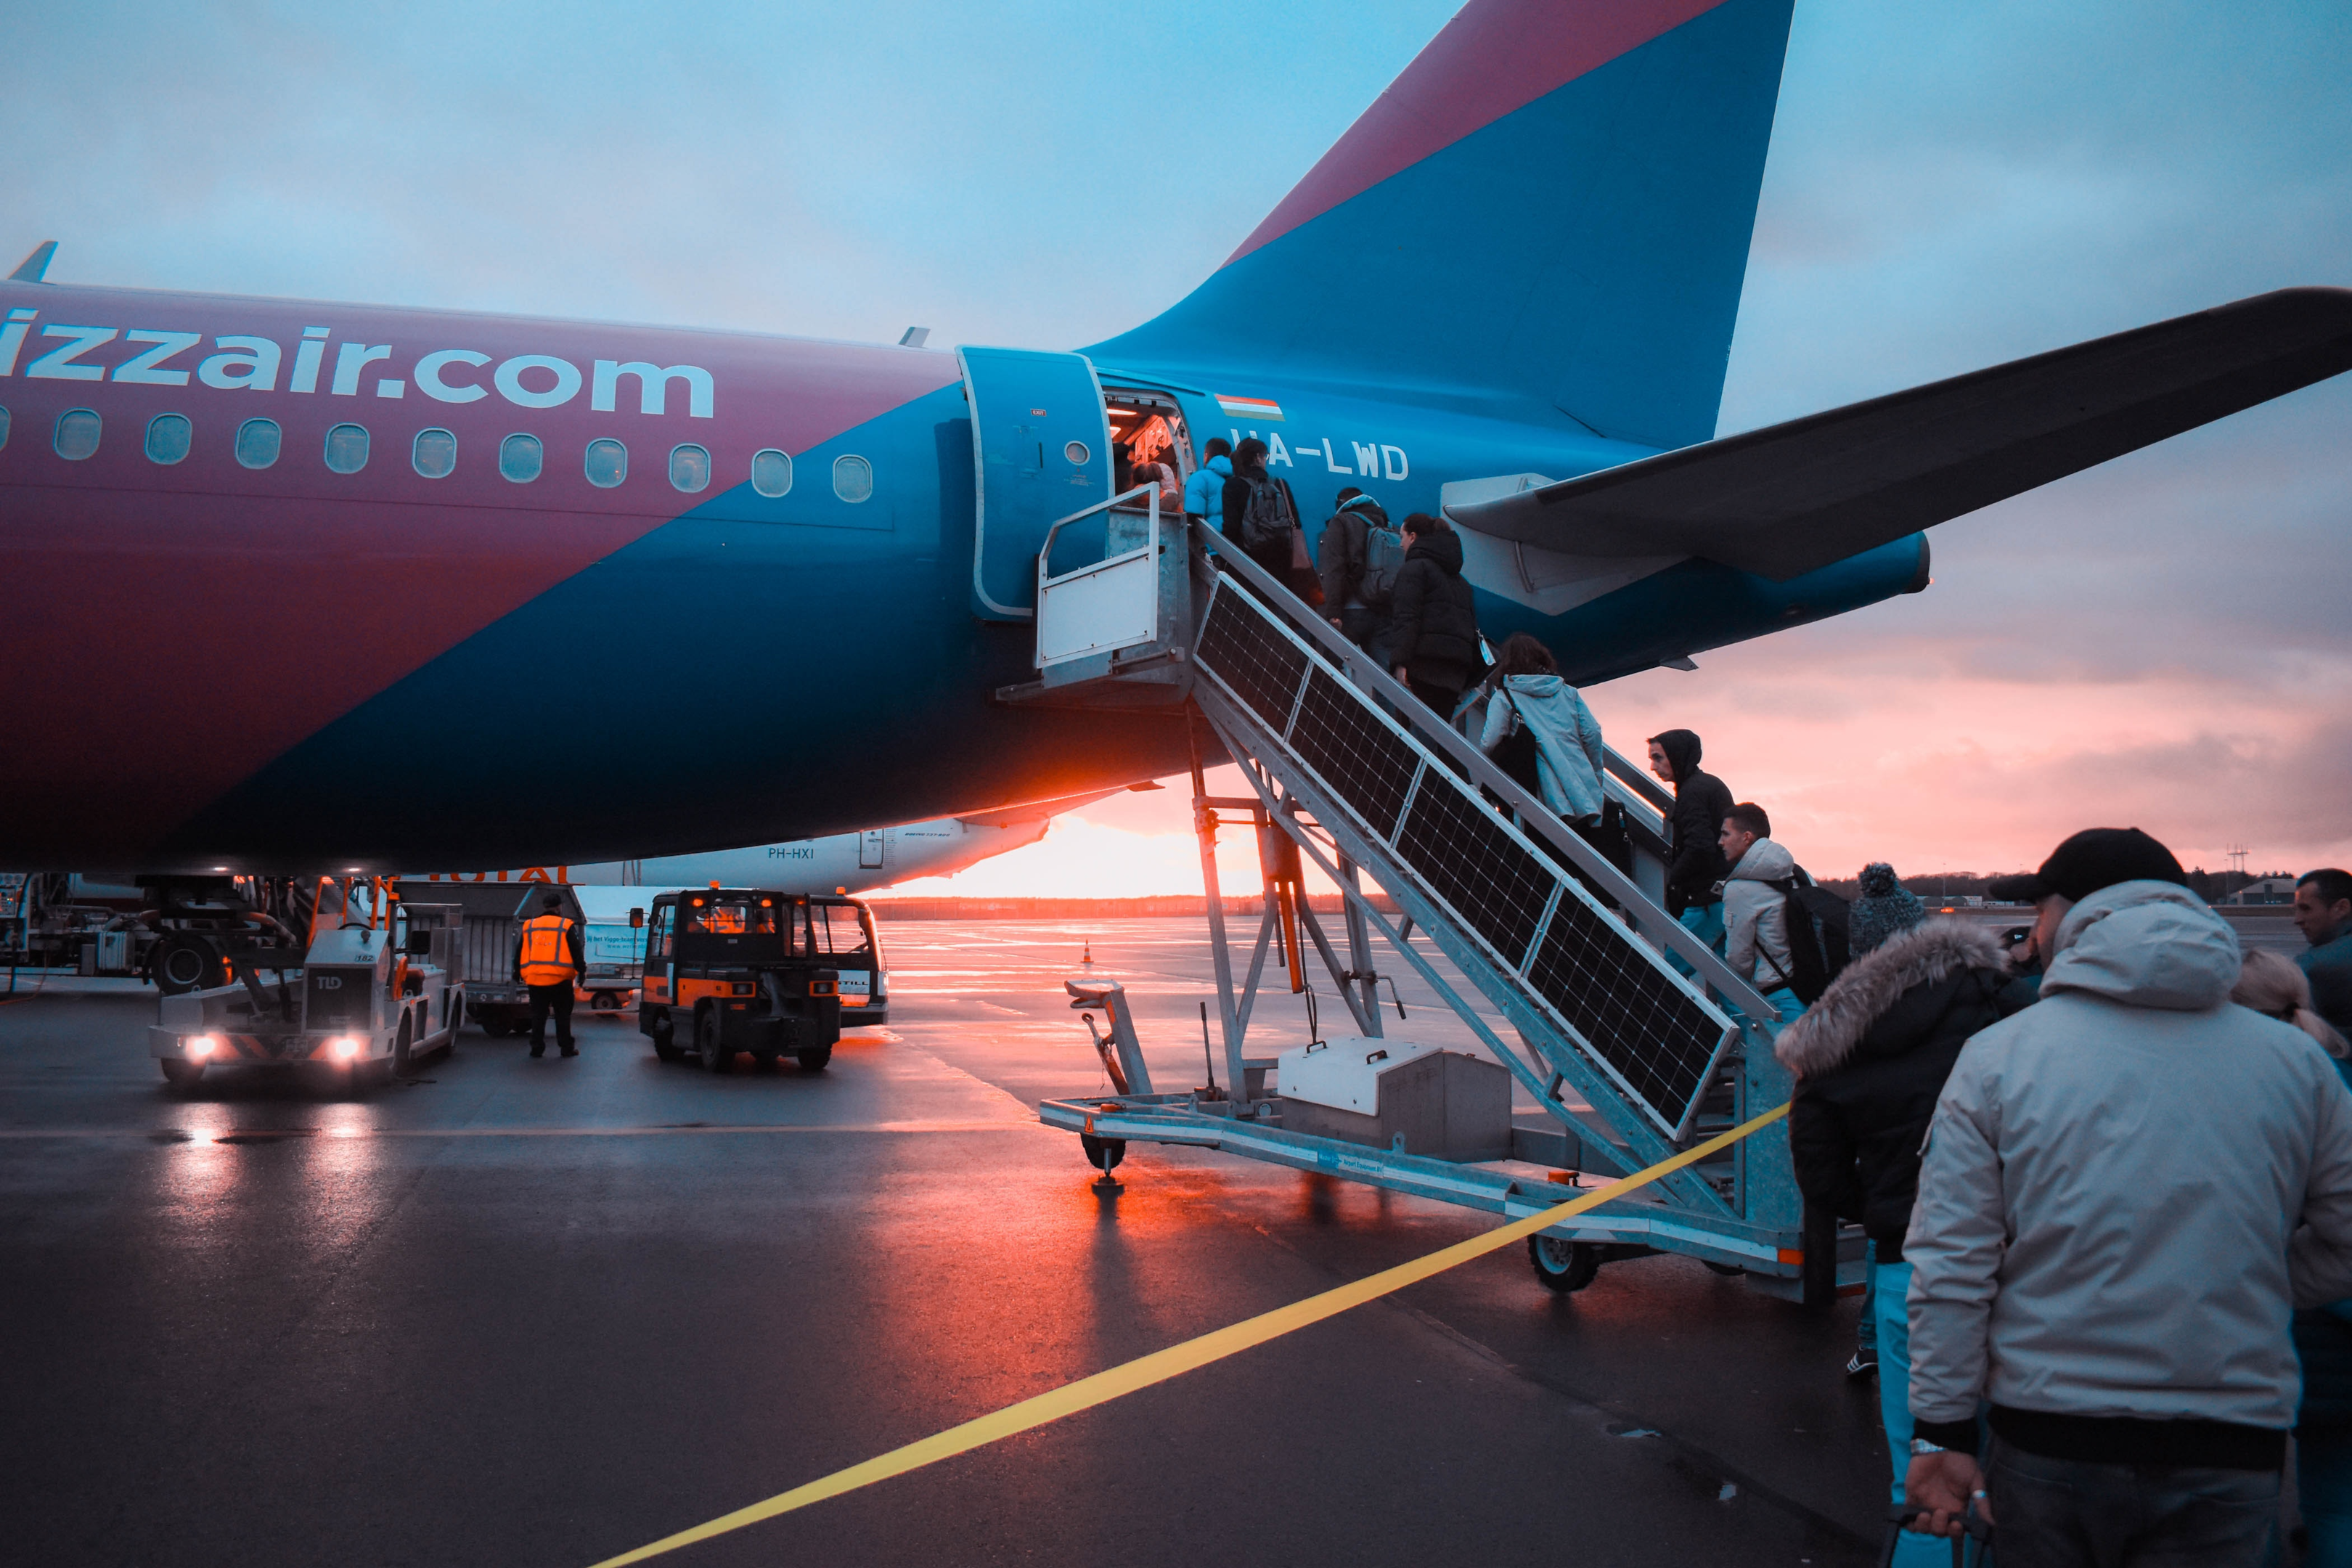 A line of travelers boarding an airplane while the sun is setting